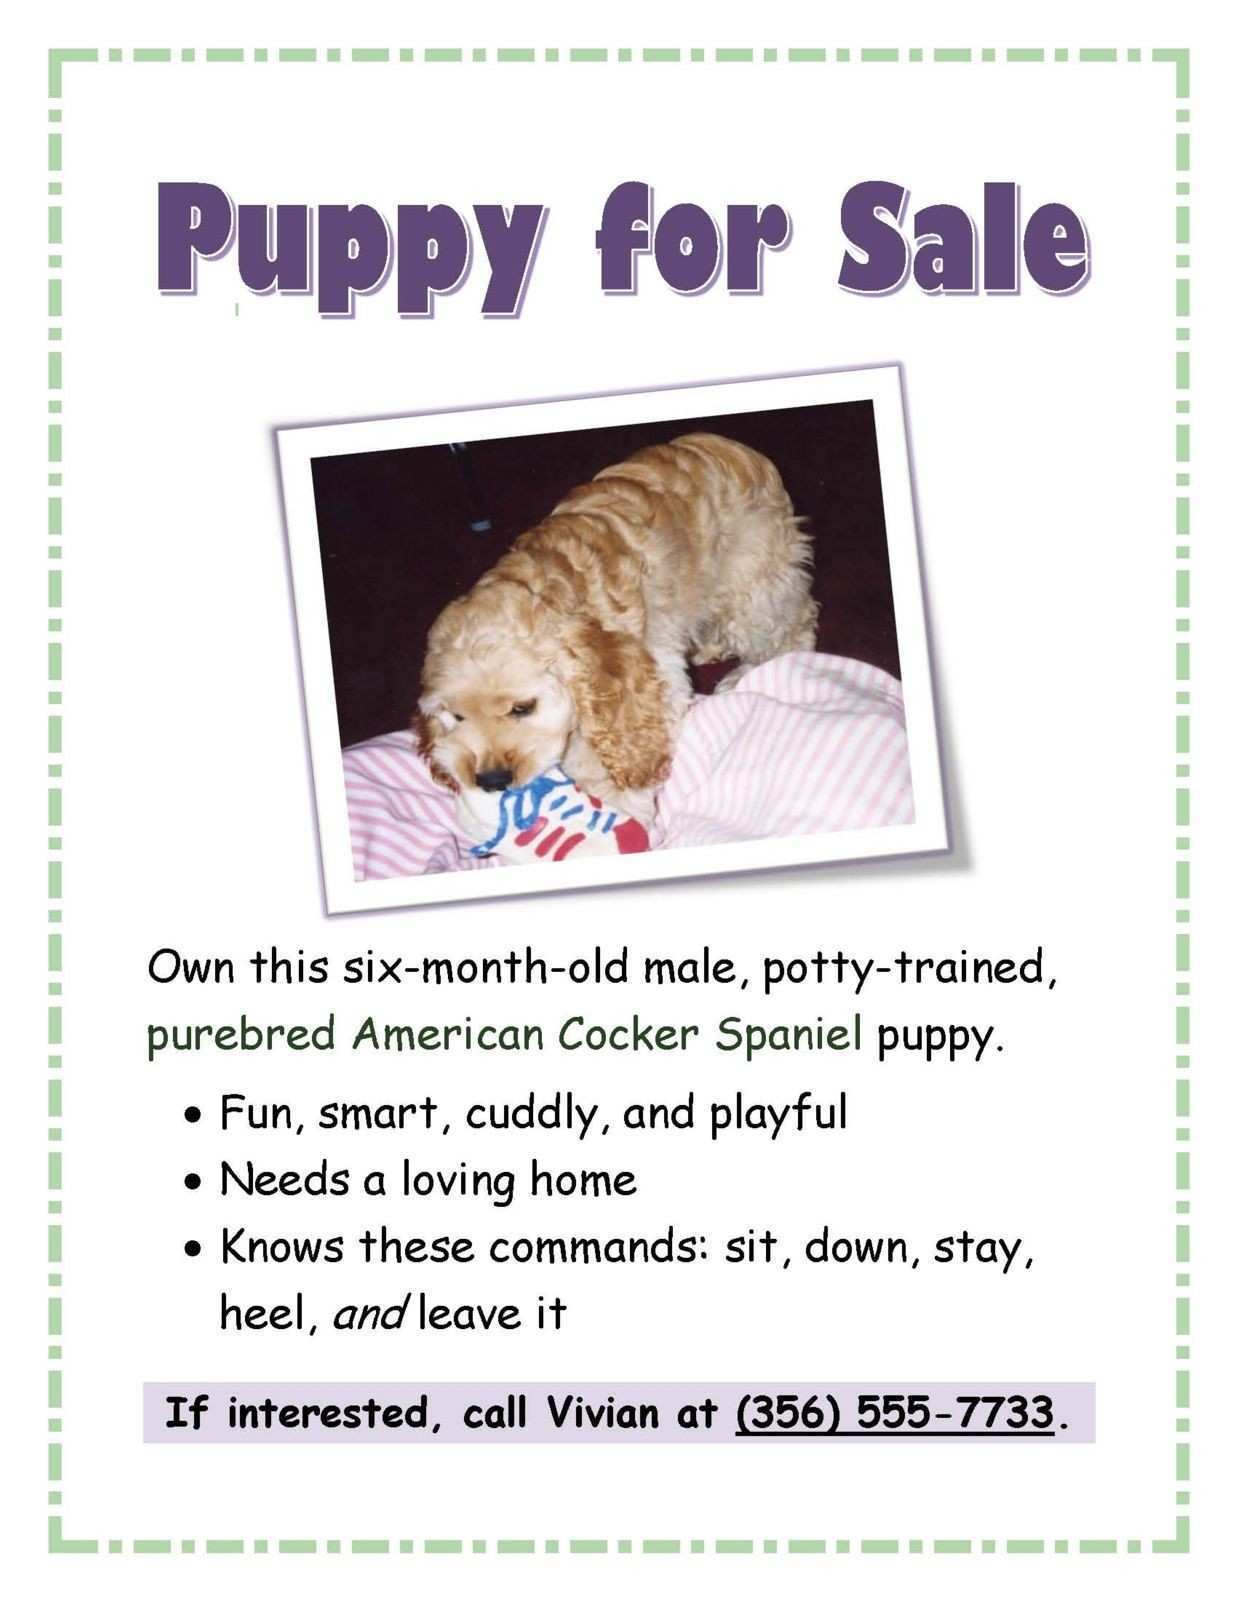 10 Online Puppy For Sale Flyer Templates Download with Puppy For  For Puppies For Sale Flyer Template Within Puppies For Sale Flyer Template